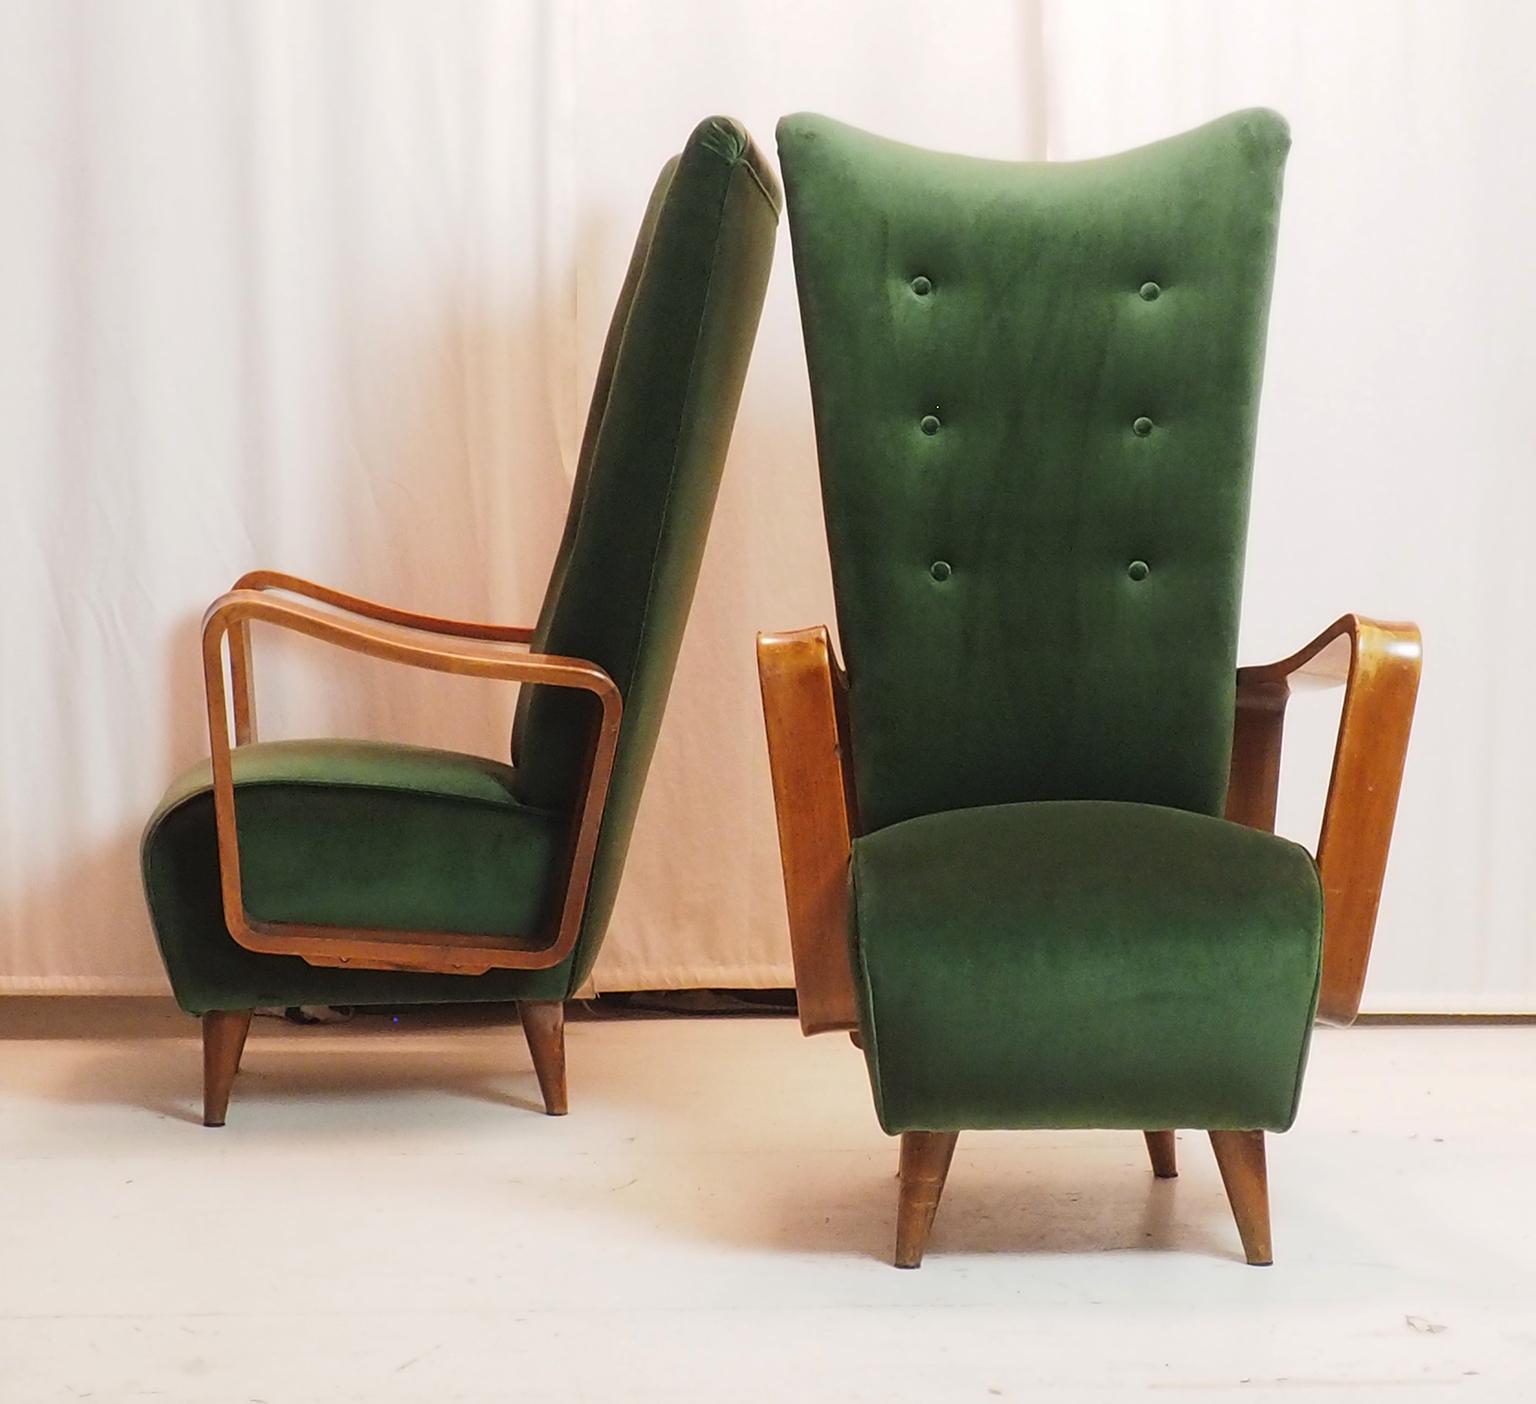 Turned Midcentury High Back Italian Green Armchairs by Pietro Lingeri, Italy, 1950s For Sale